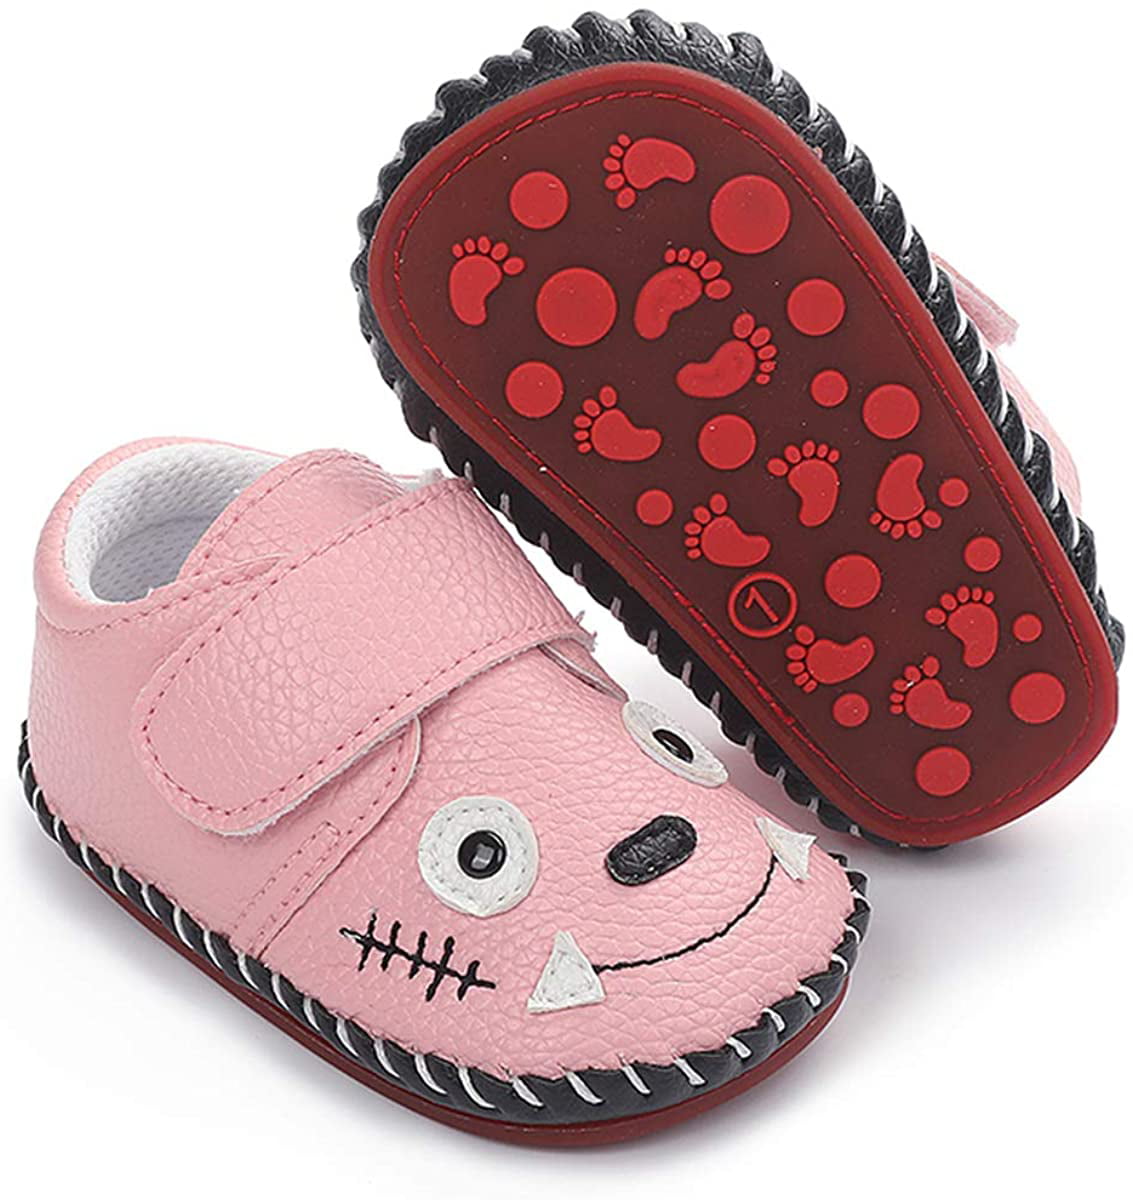 Mejale Baby Rubber Sole Shoes Boy Girl Infant Crawling Toddler Moccasins Leather Walking Anti-Slip Newborn Mini Kids Crib Boots 